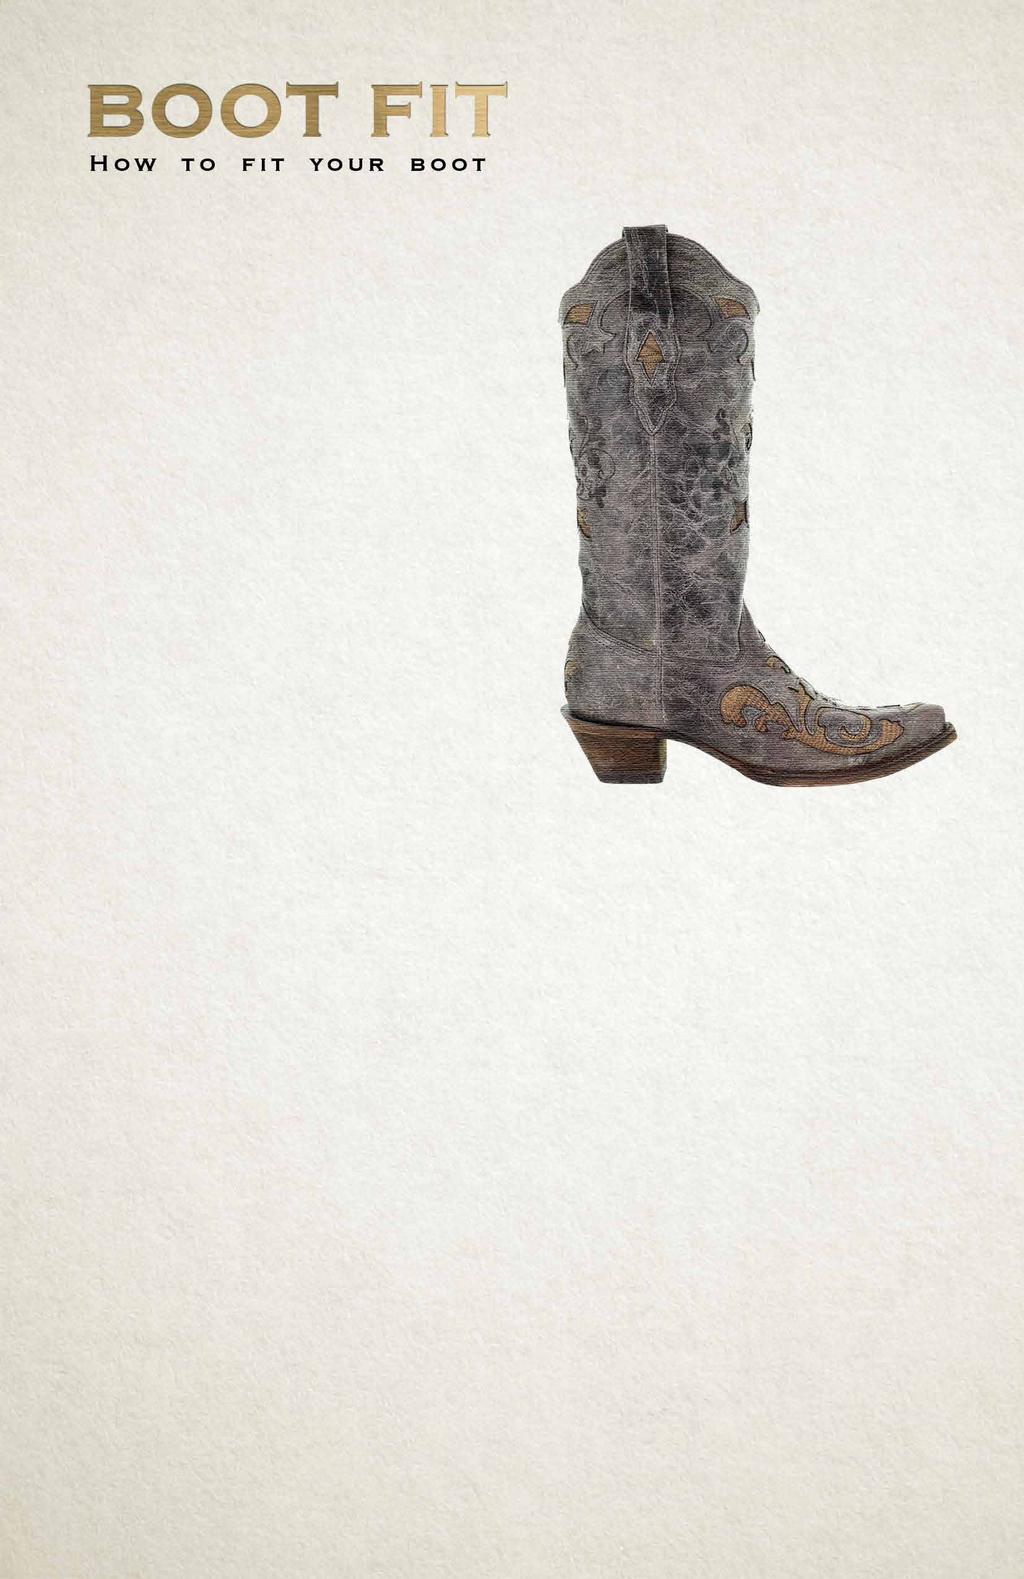 Each pair of Corral Boots are hand made by artisans, using the finest leather and exotic skins available.